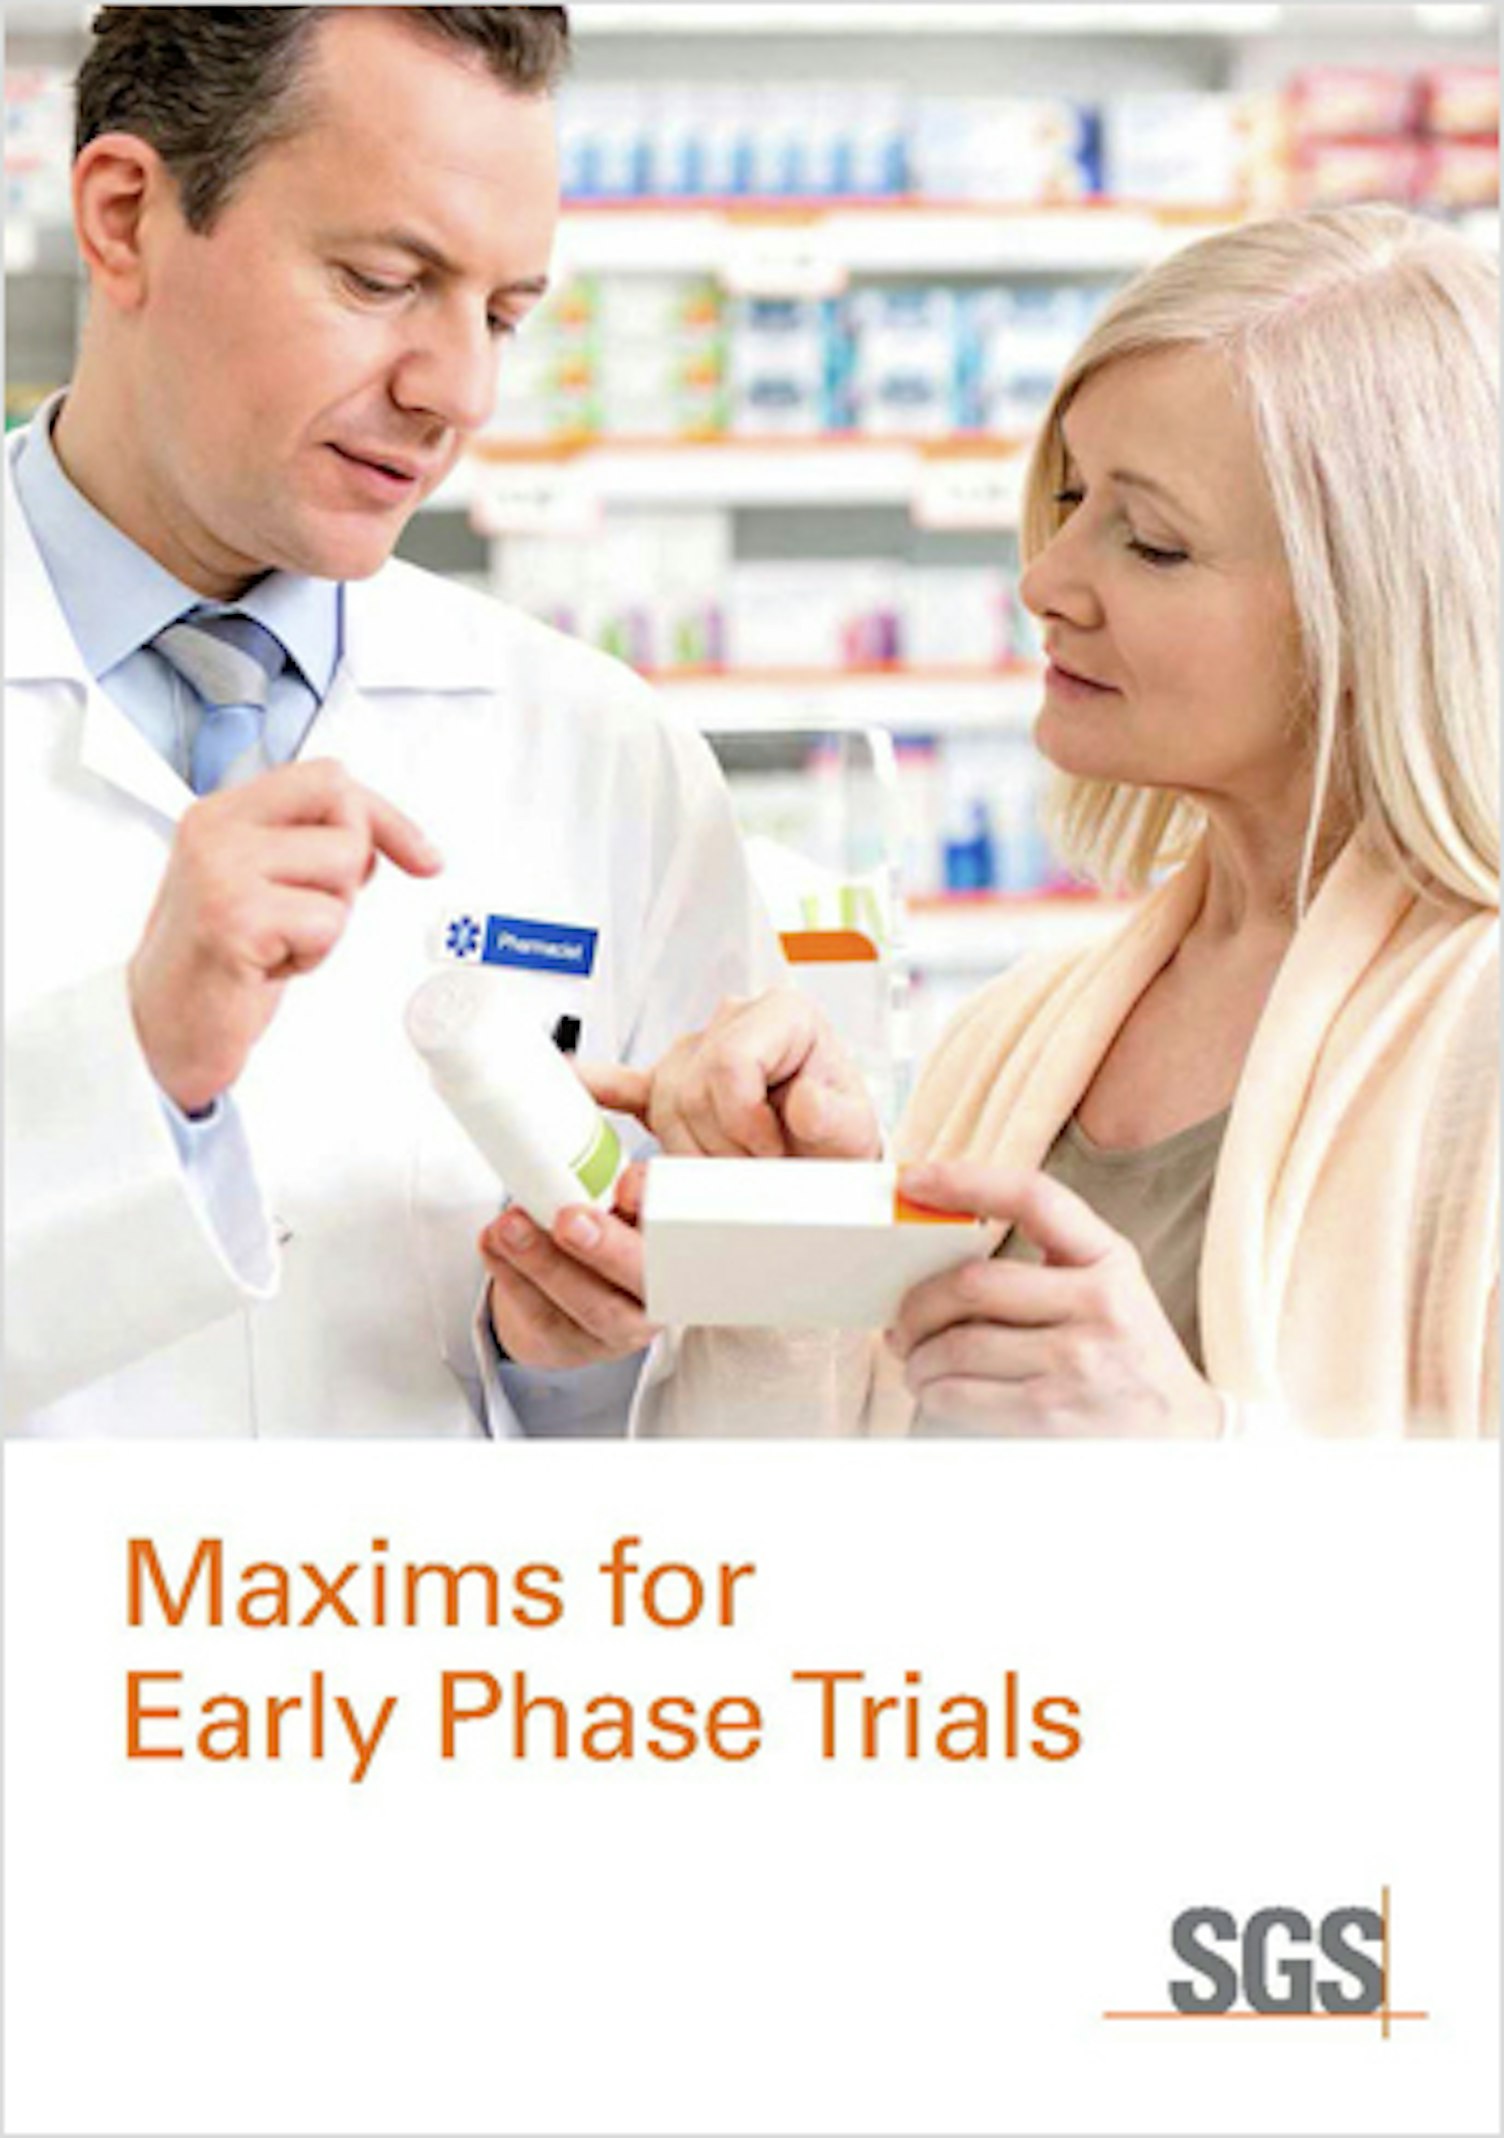 Maxims for Early Phase Trials